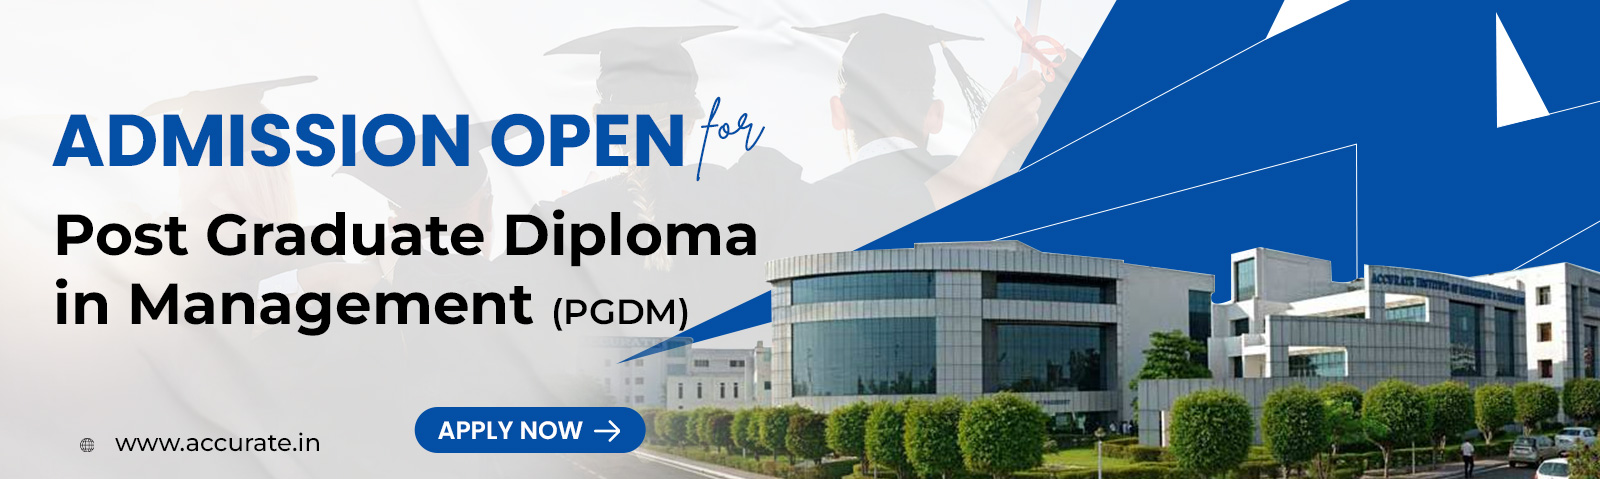 admission open for pgdm